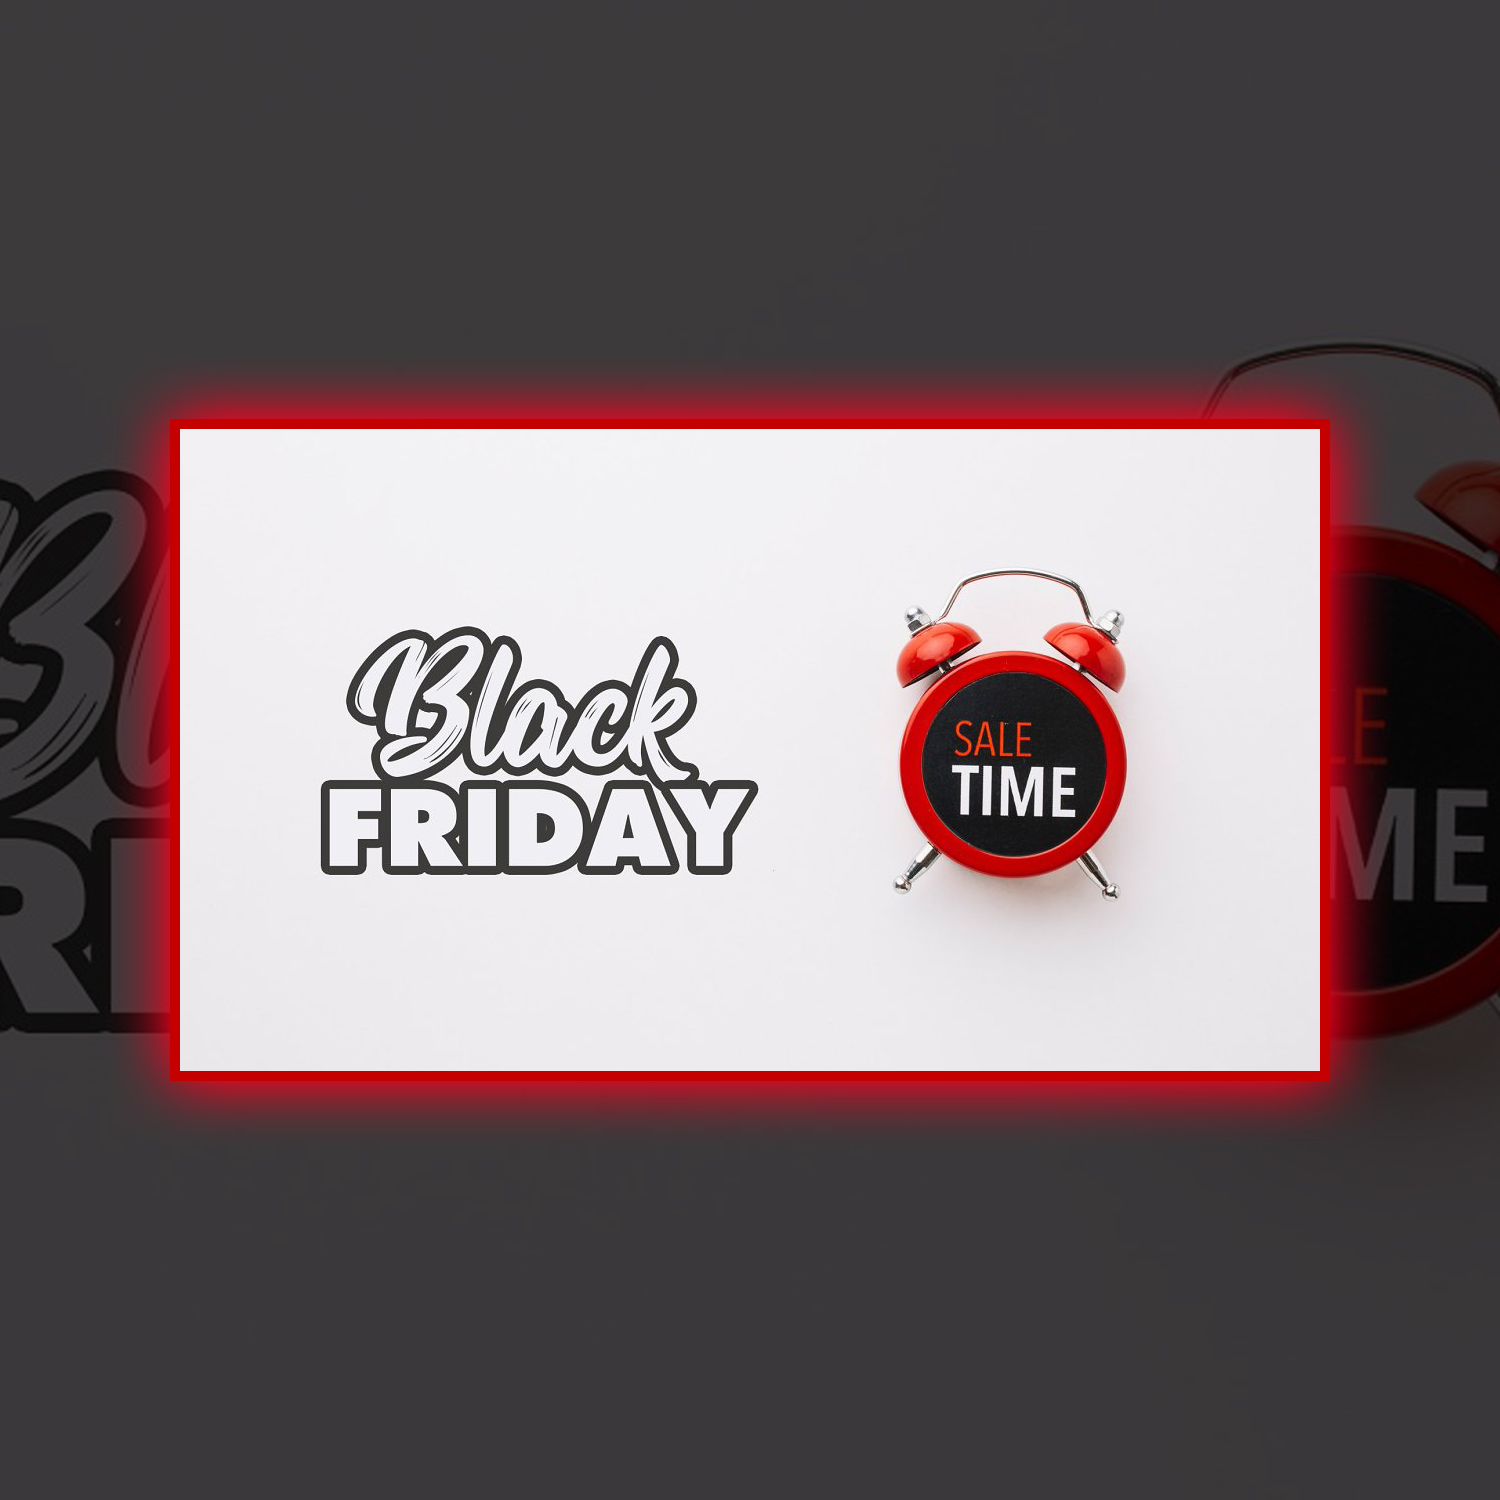 Images with corporate black friday sale banner.